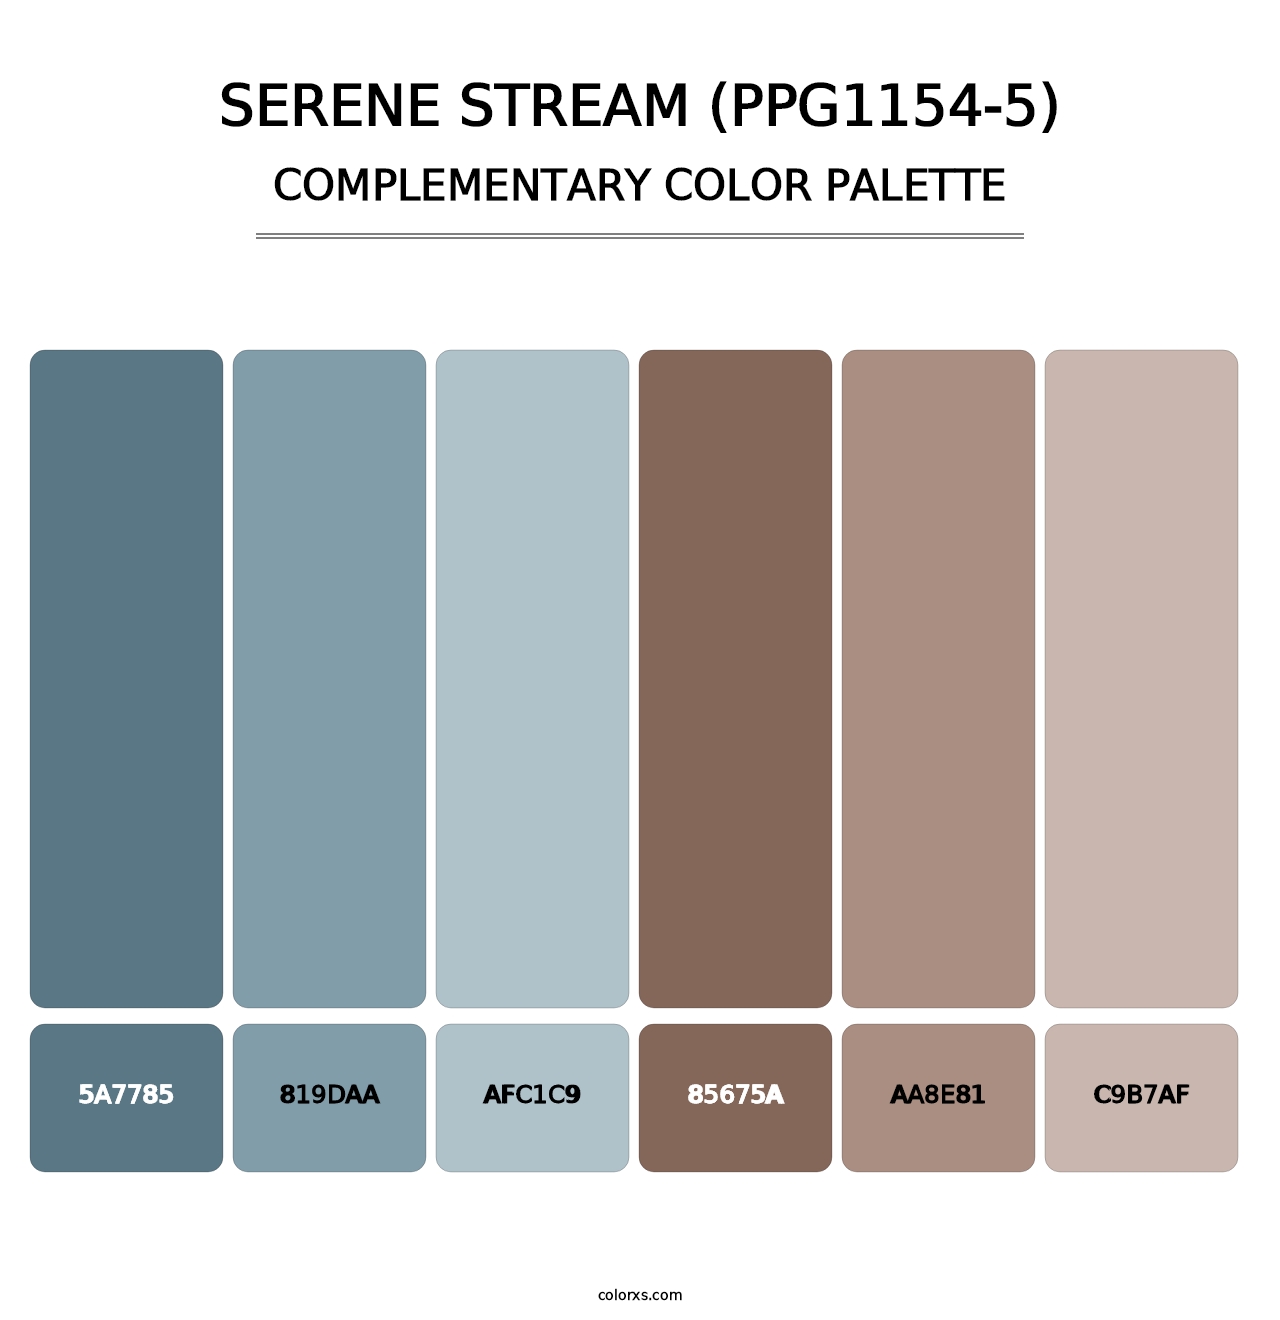 Serene Stream (PPG1154-5) - Complementary Color Palette